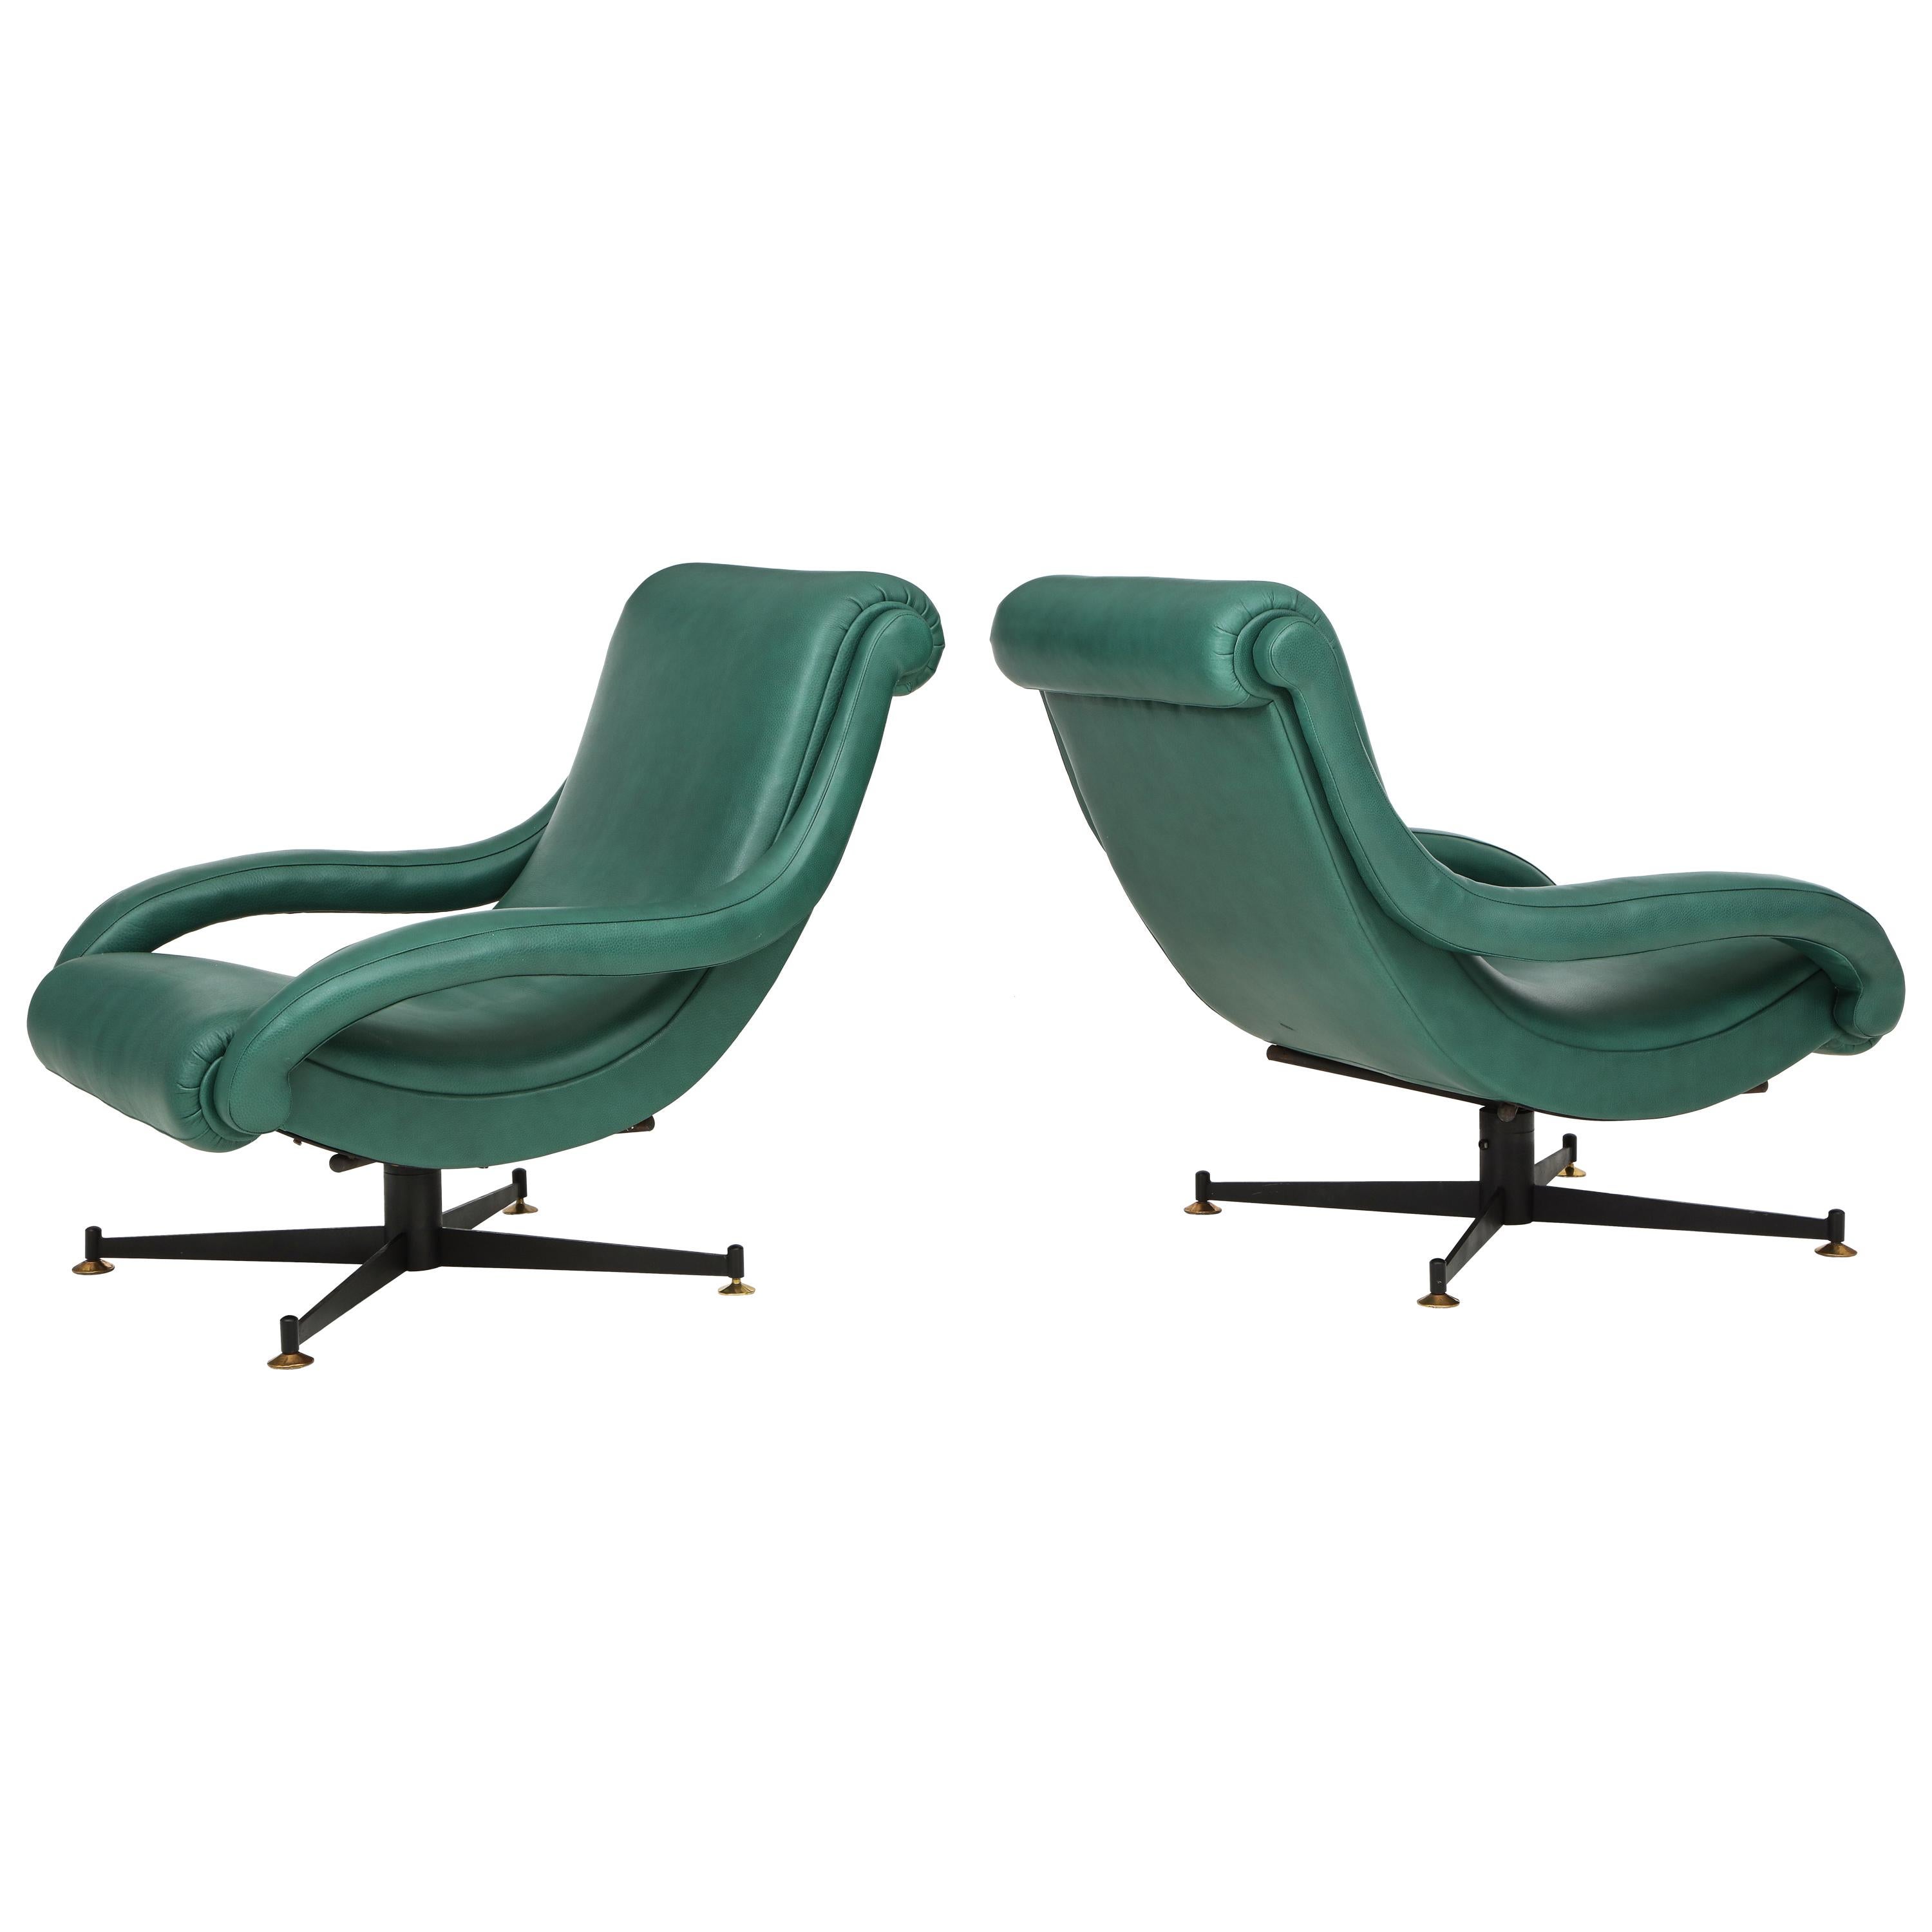 Pair of Lounge Chairs in Gucci Green Leather by Radice for Lenzi, c. 1950, Italy